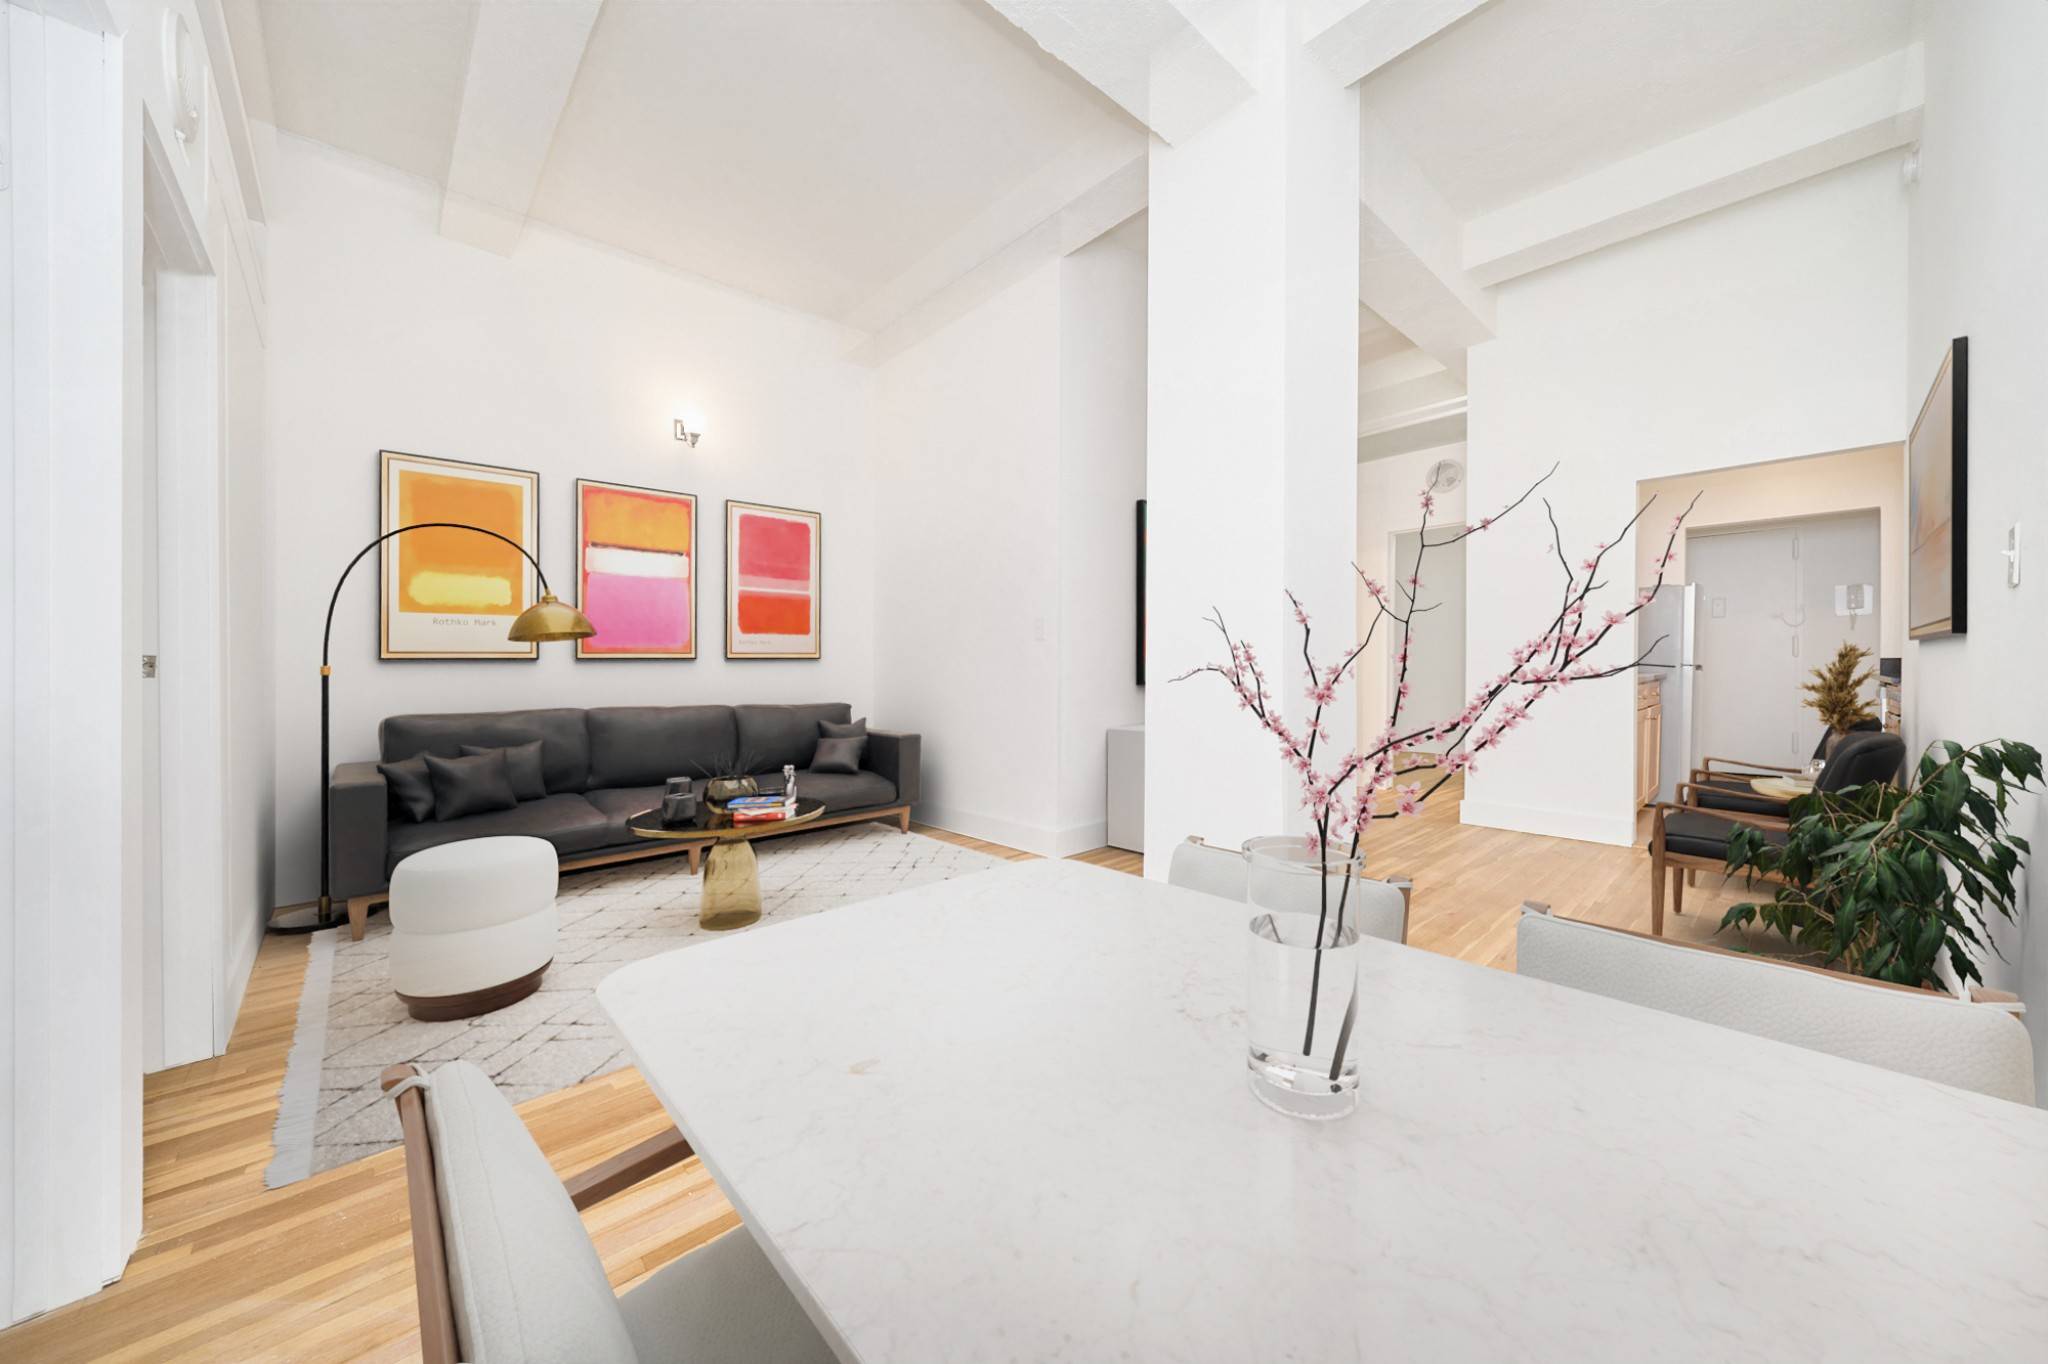 Available NowThis loft style apartment features soaring 11 foot ceilings, beautiful light colored hardwood floors, an open kitchen with stainless steal appliances and granite countertops, and a large living space ...